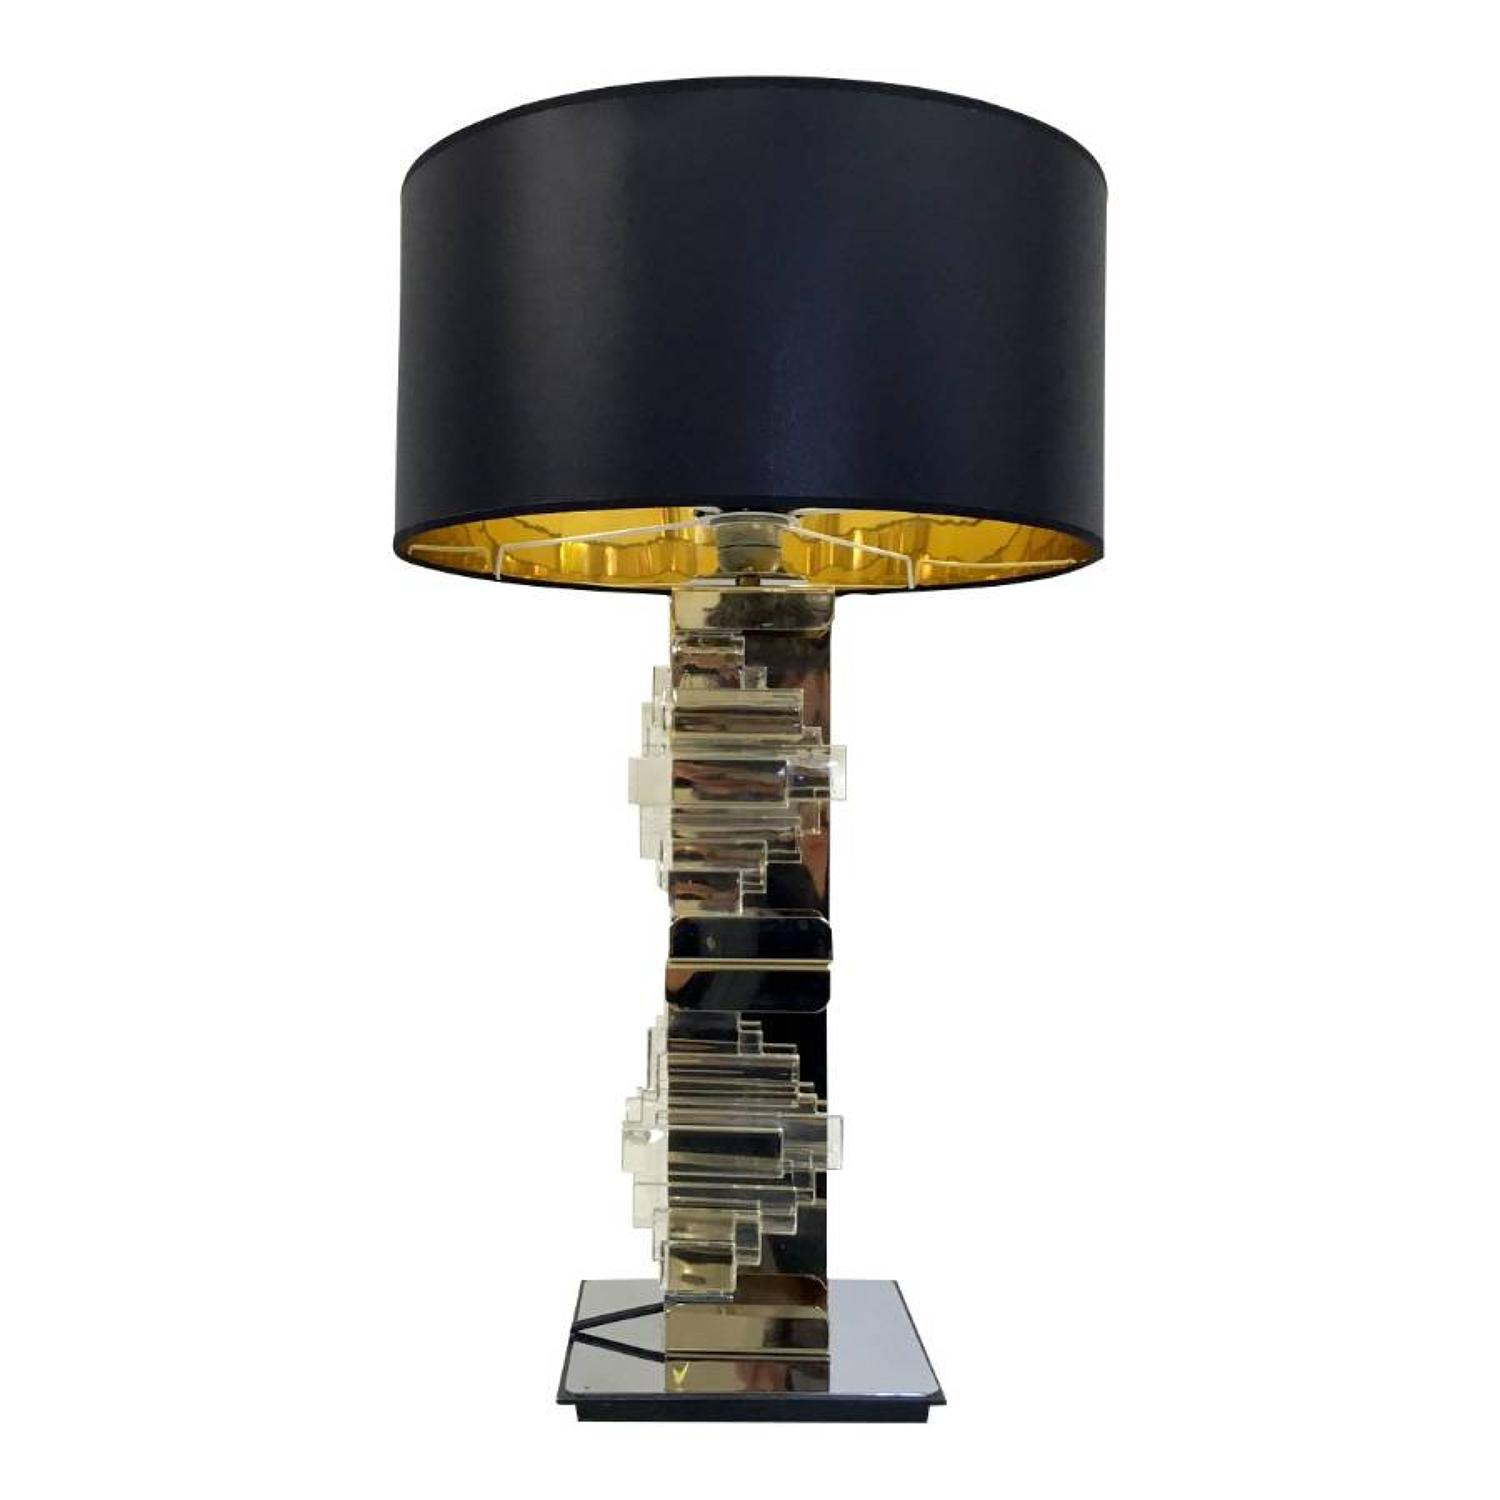 Brass, chrome and glass table lamp by Sciolari